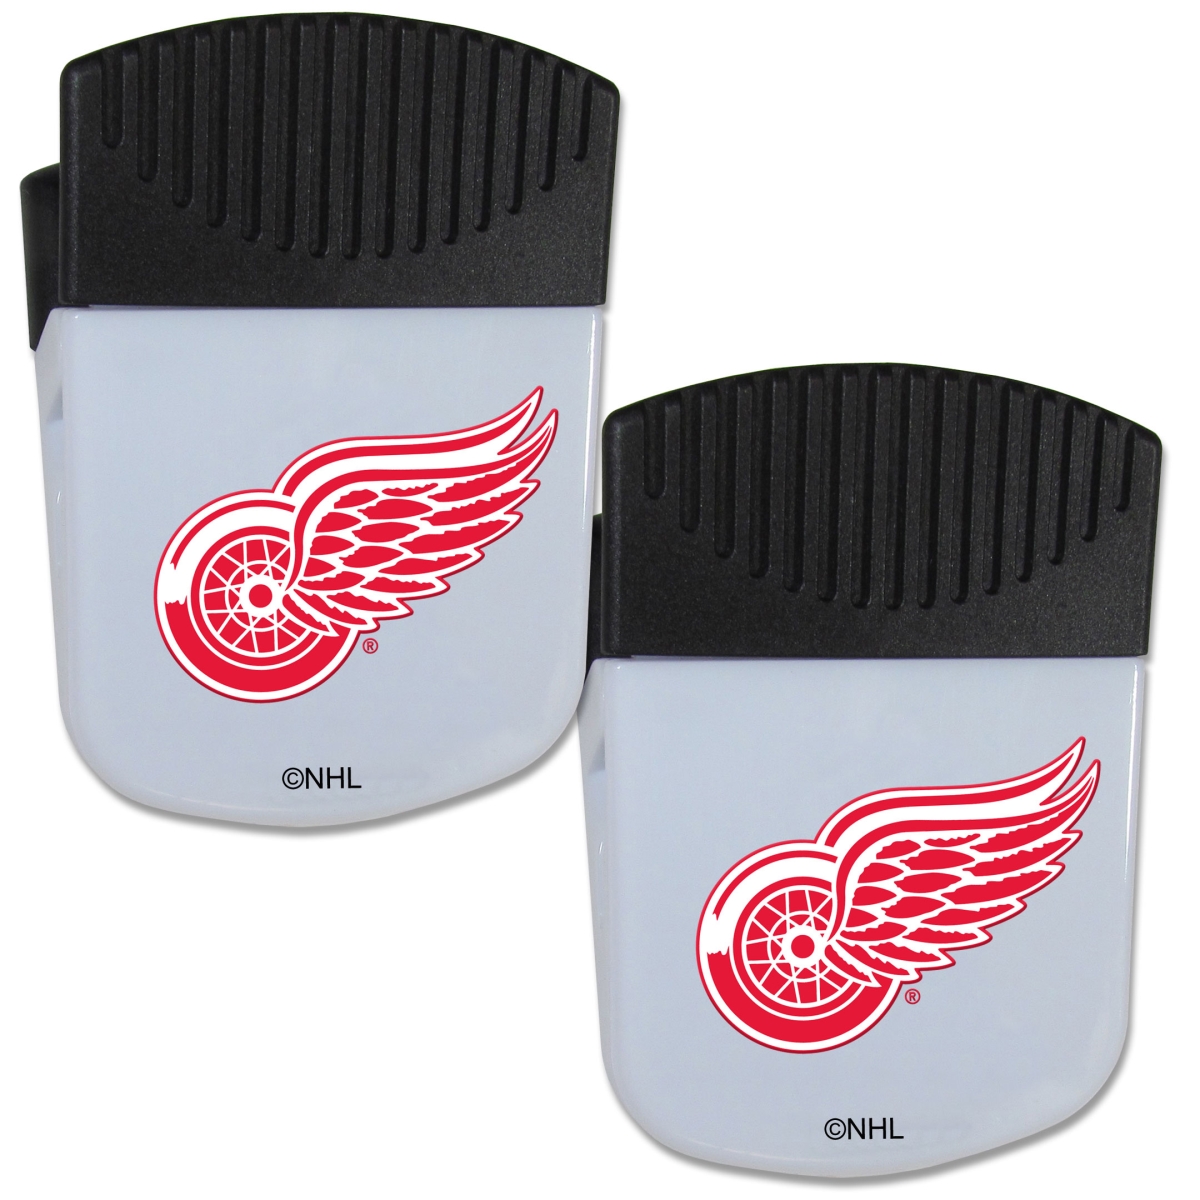 Picture of Siskiyou 2HPMC110 Unisex NHL Detroit Red Wings Chip Clip Magnet with Bottle Opener - Pack of 2